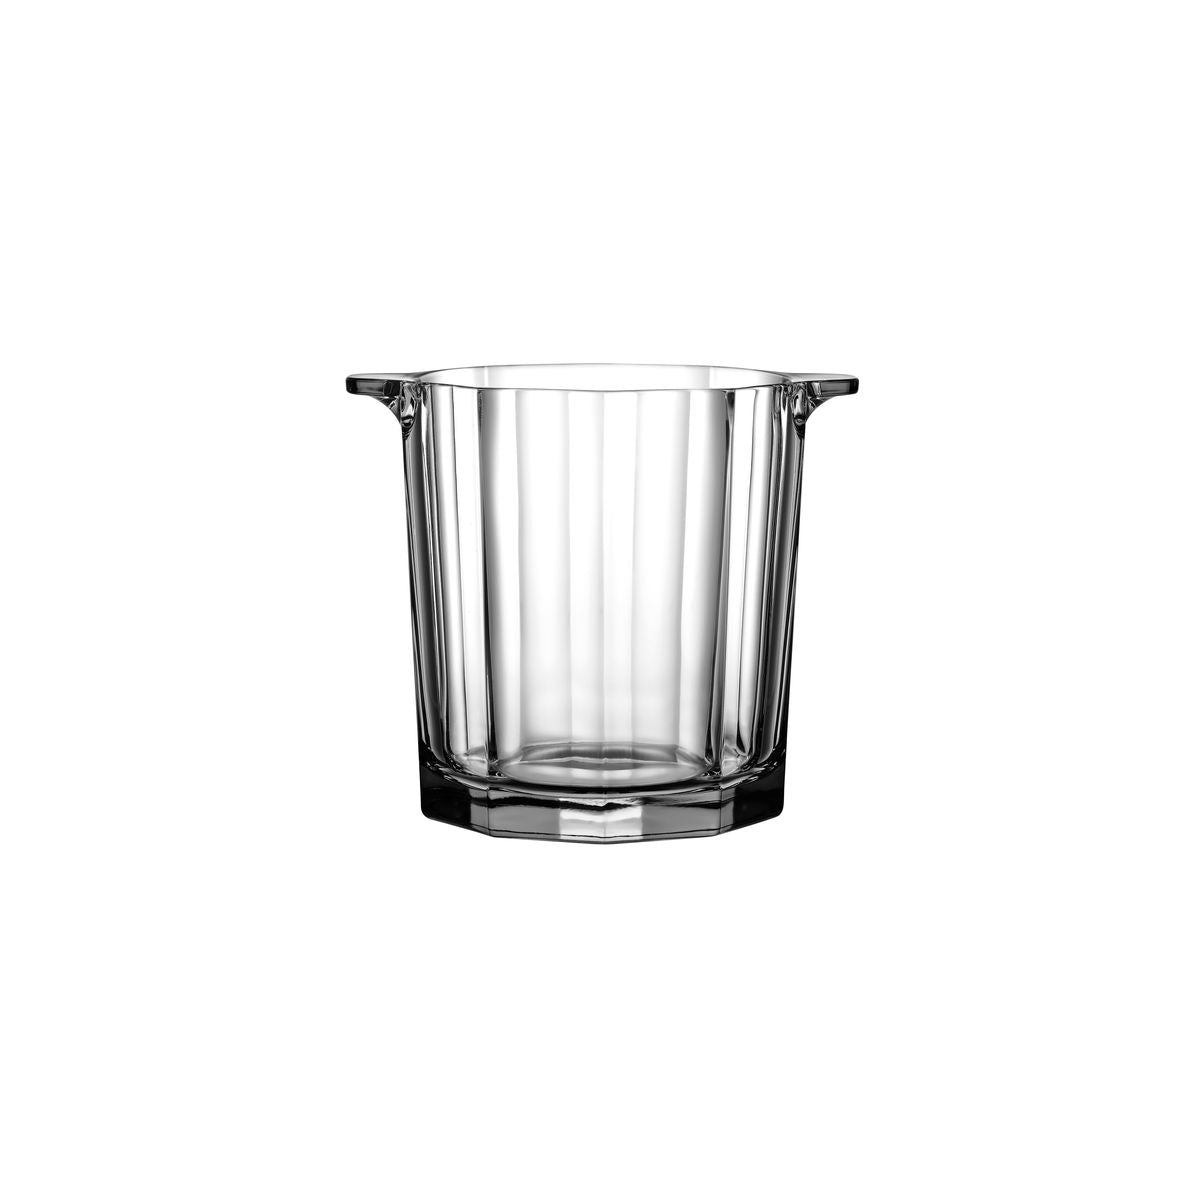 Ice Bucket - 1650ml, Churchill from Nude. Sold in boxes of 1. Hospitality quality at wholesale price with The Flying Fork! 